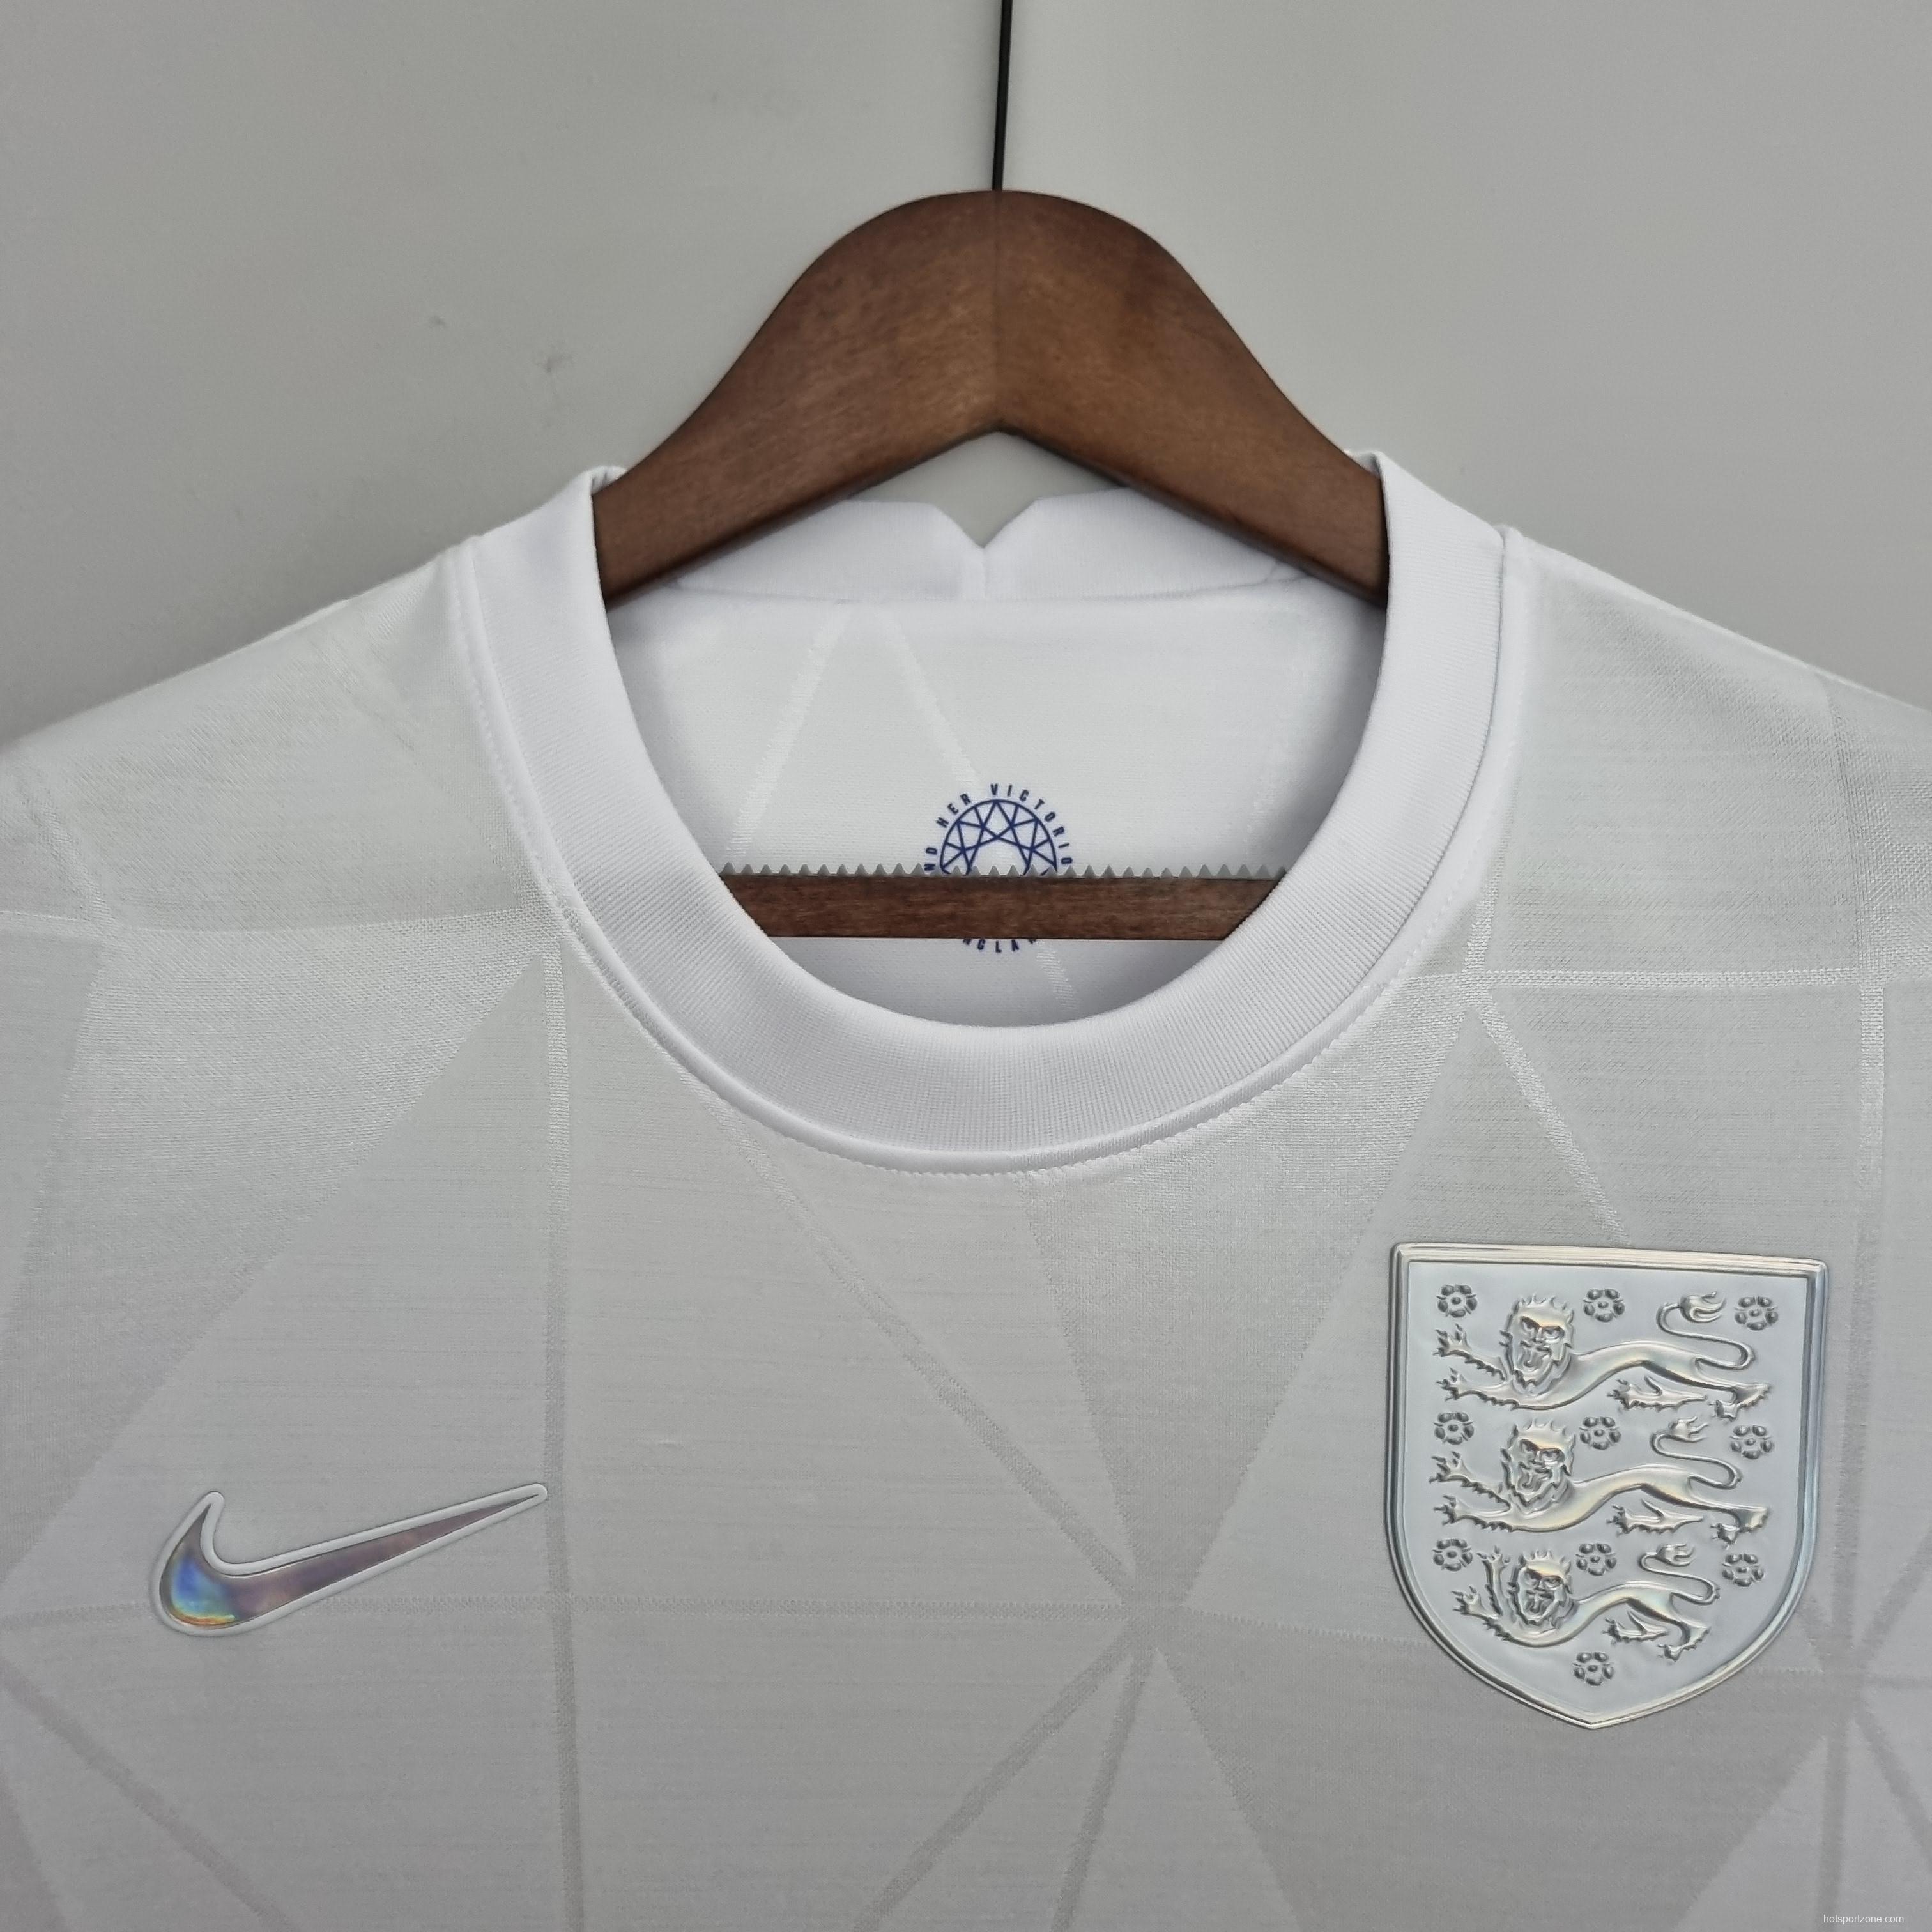 2022 England Home Soccer Jersey